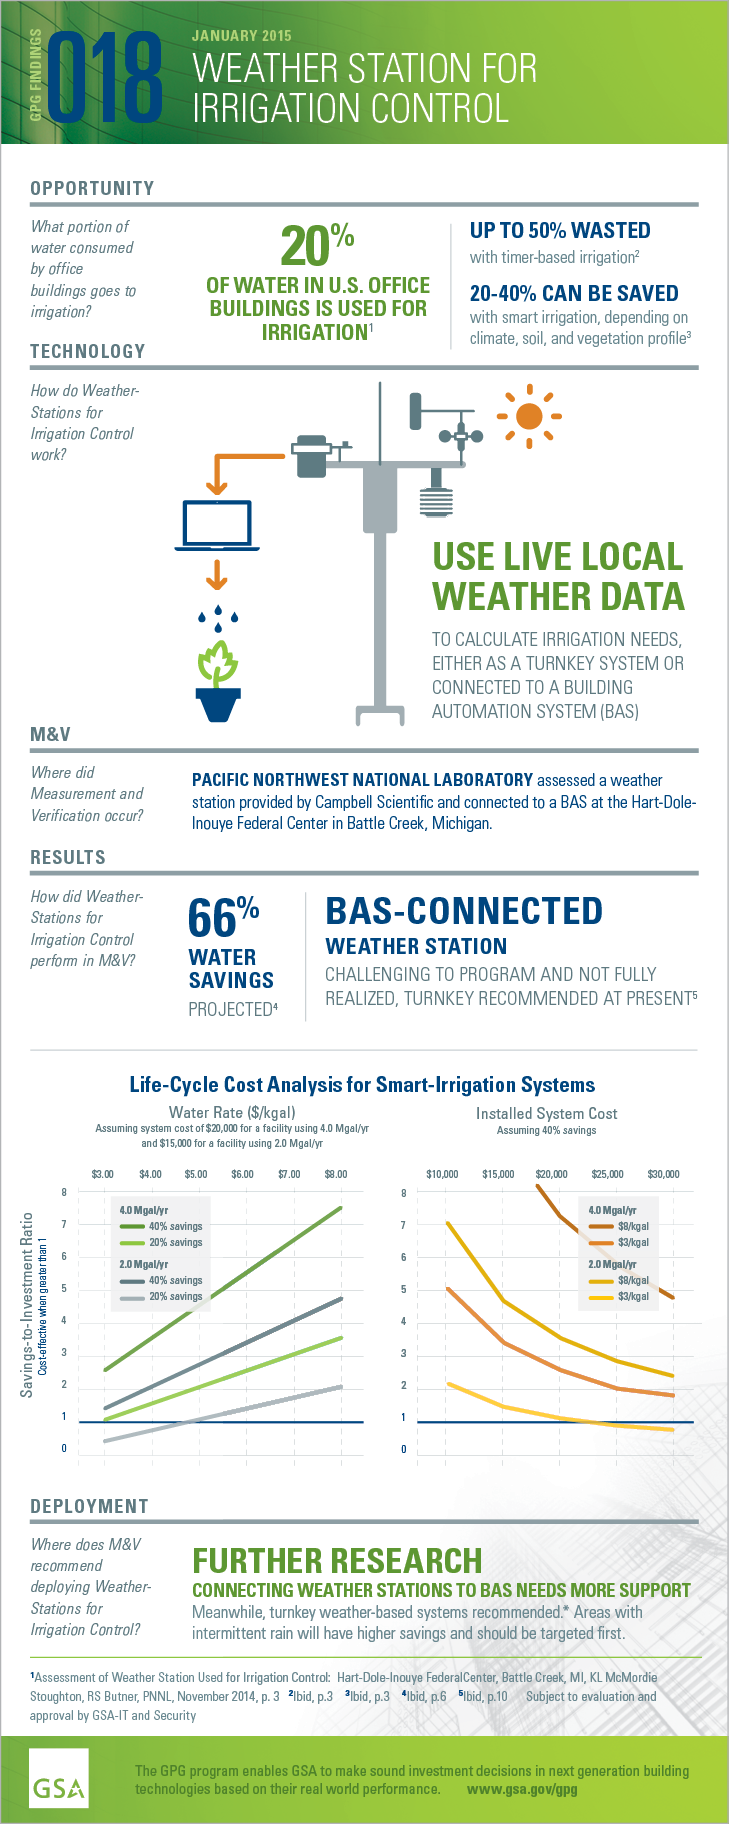 Download the PDF version of the full-sized infographic for GPG018 Weather Station for Irrigation.